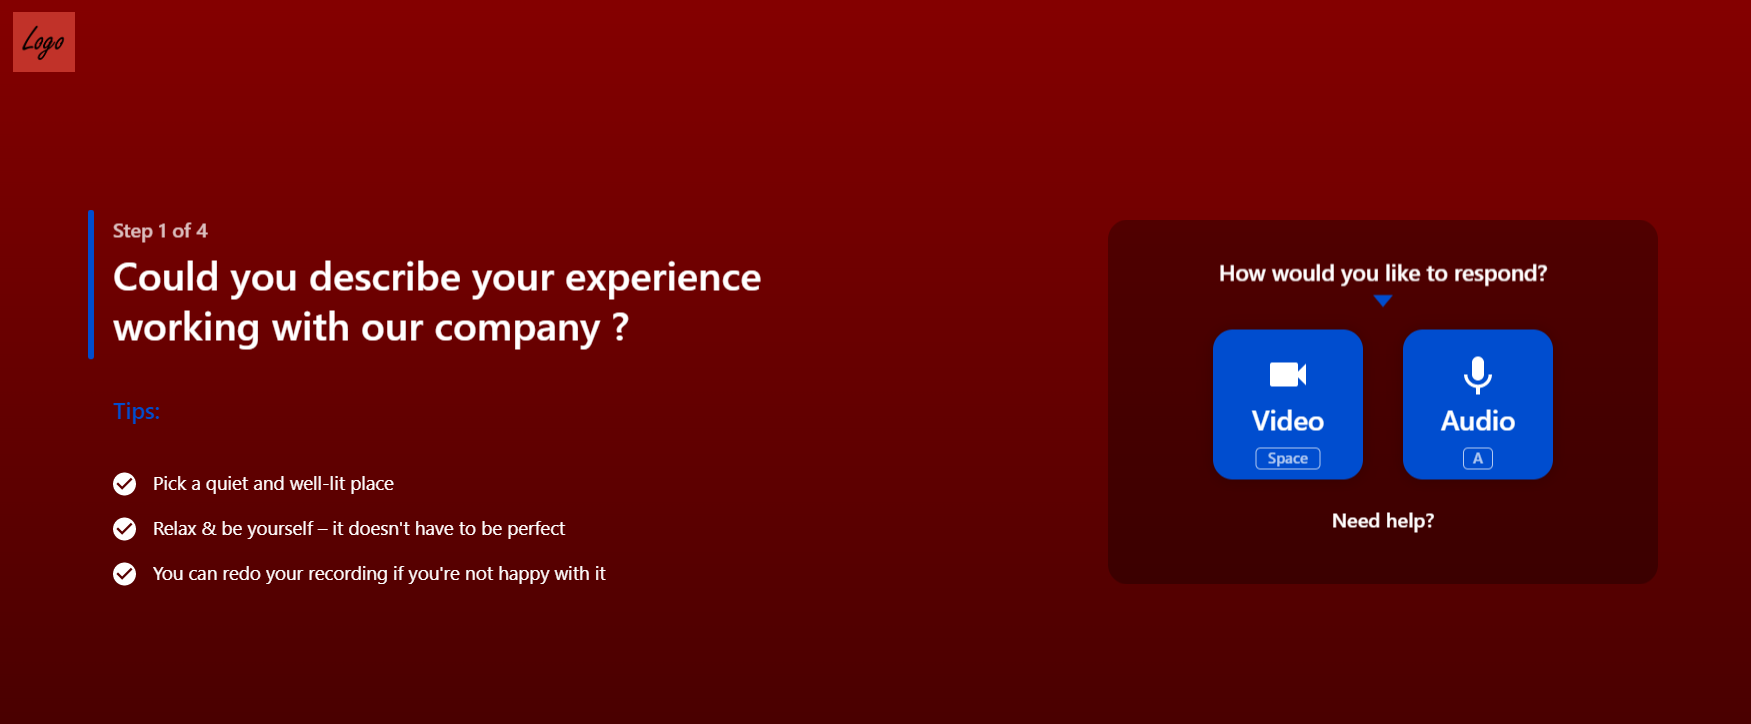 Example question: "Could you describe your experience working with our company?"